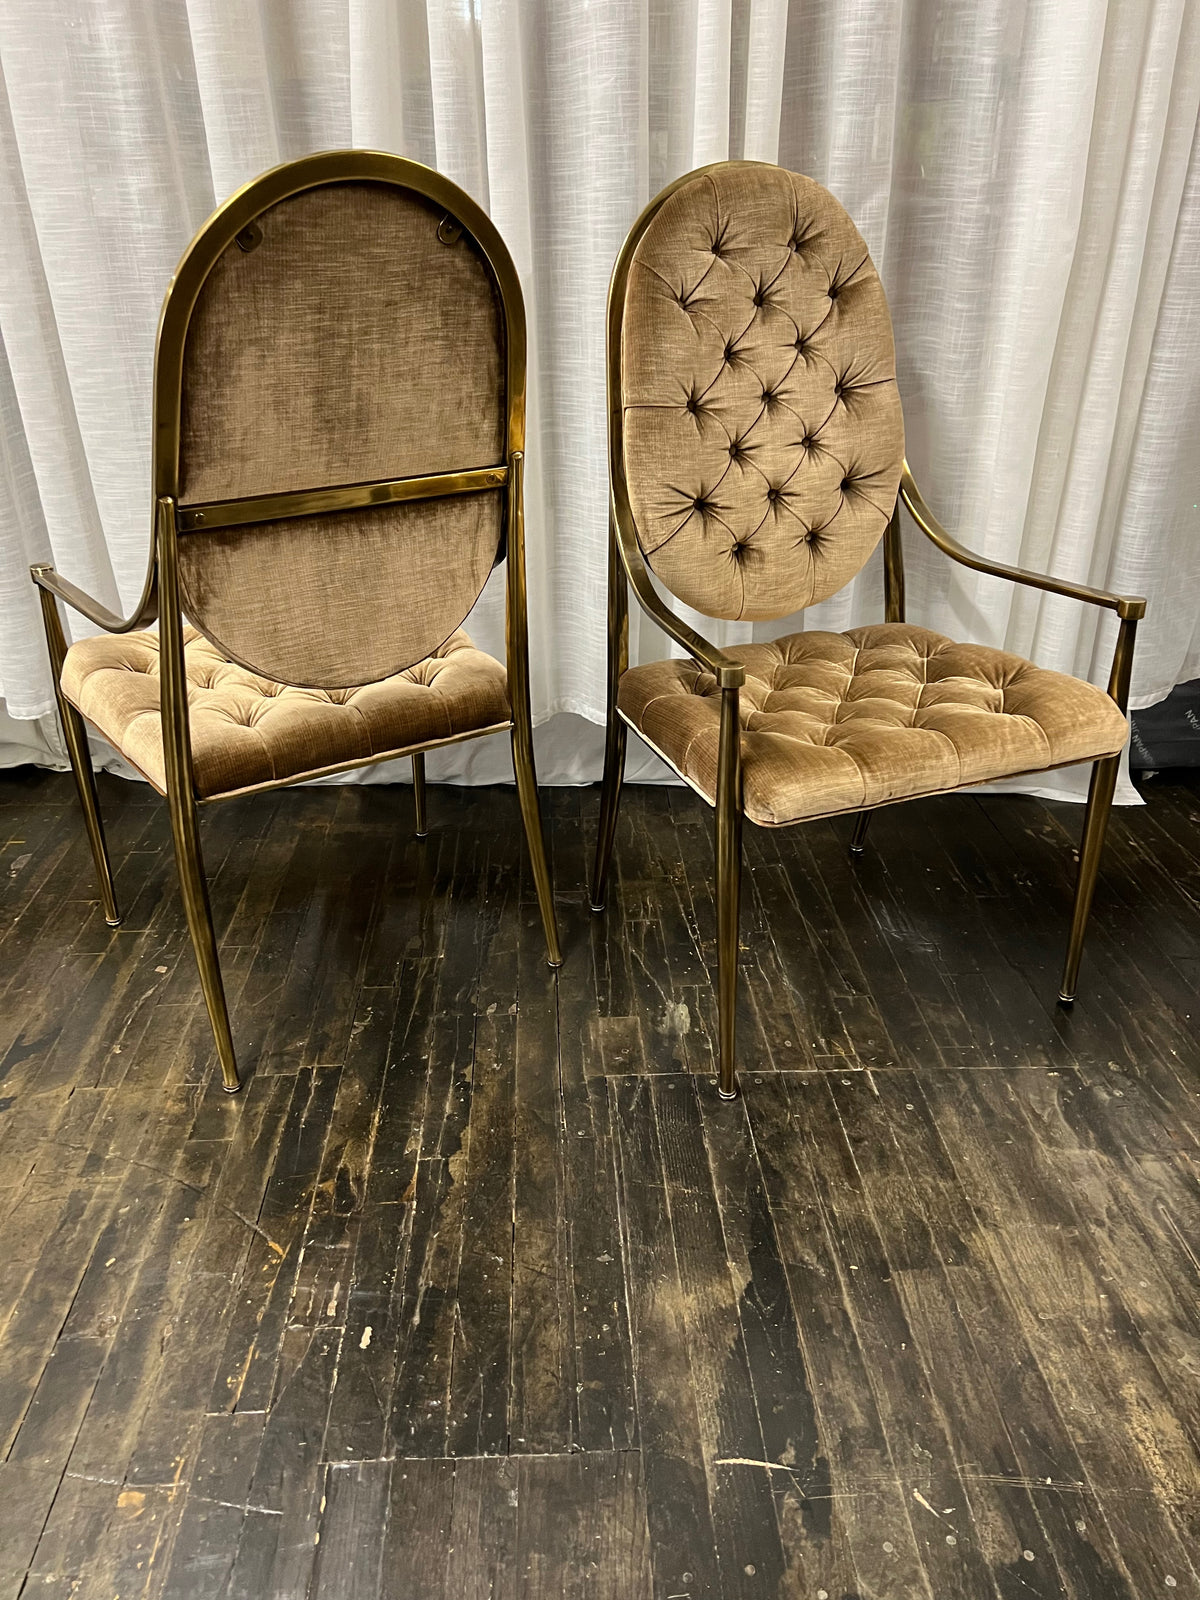 Set of 8 Mastercraft Brass Dining Chairs with Arms.  Bronze velvet upholstery.  Original excellent condition.  Hollywood regency.  Midcentury Modern Dining.  Bernhard Rohne.